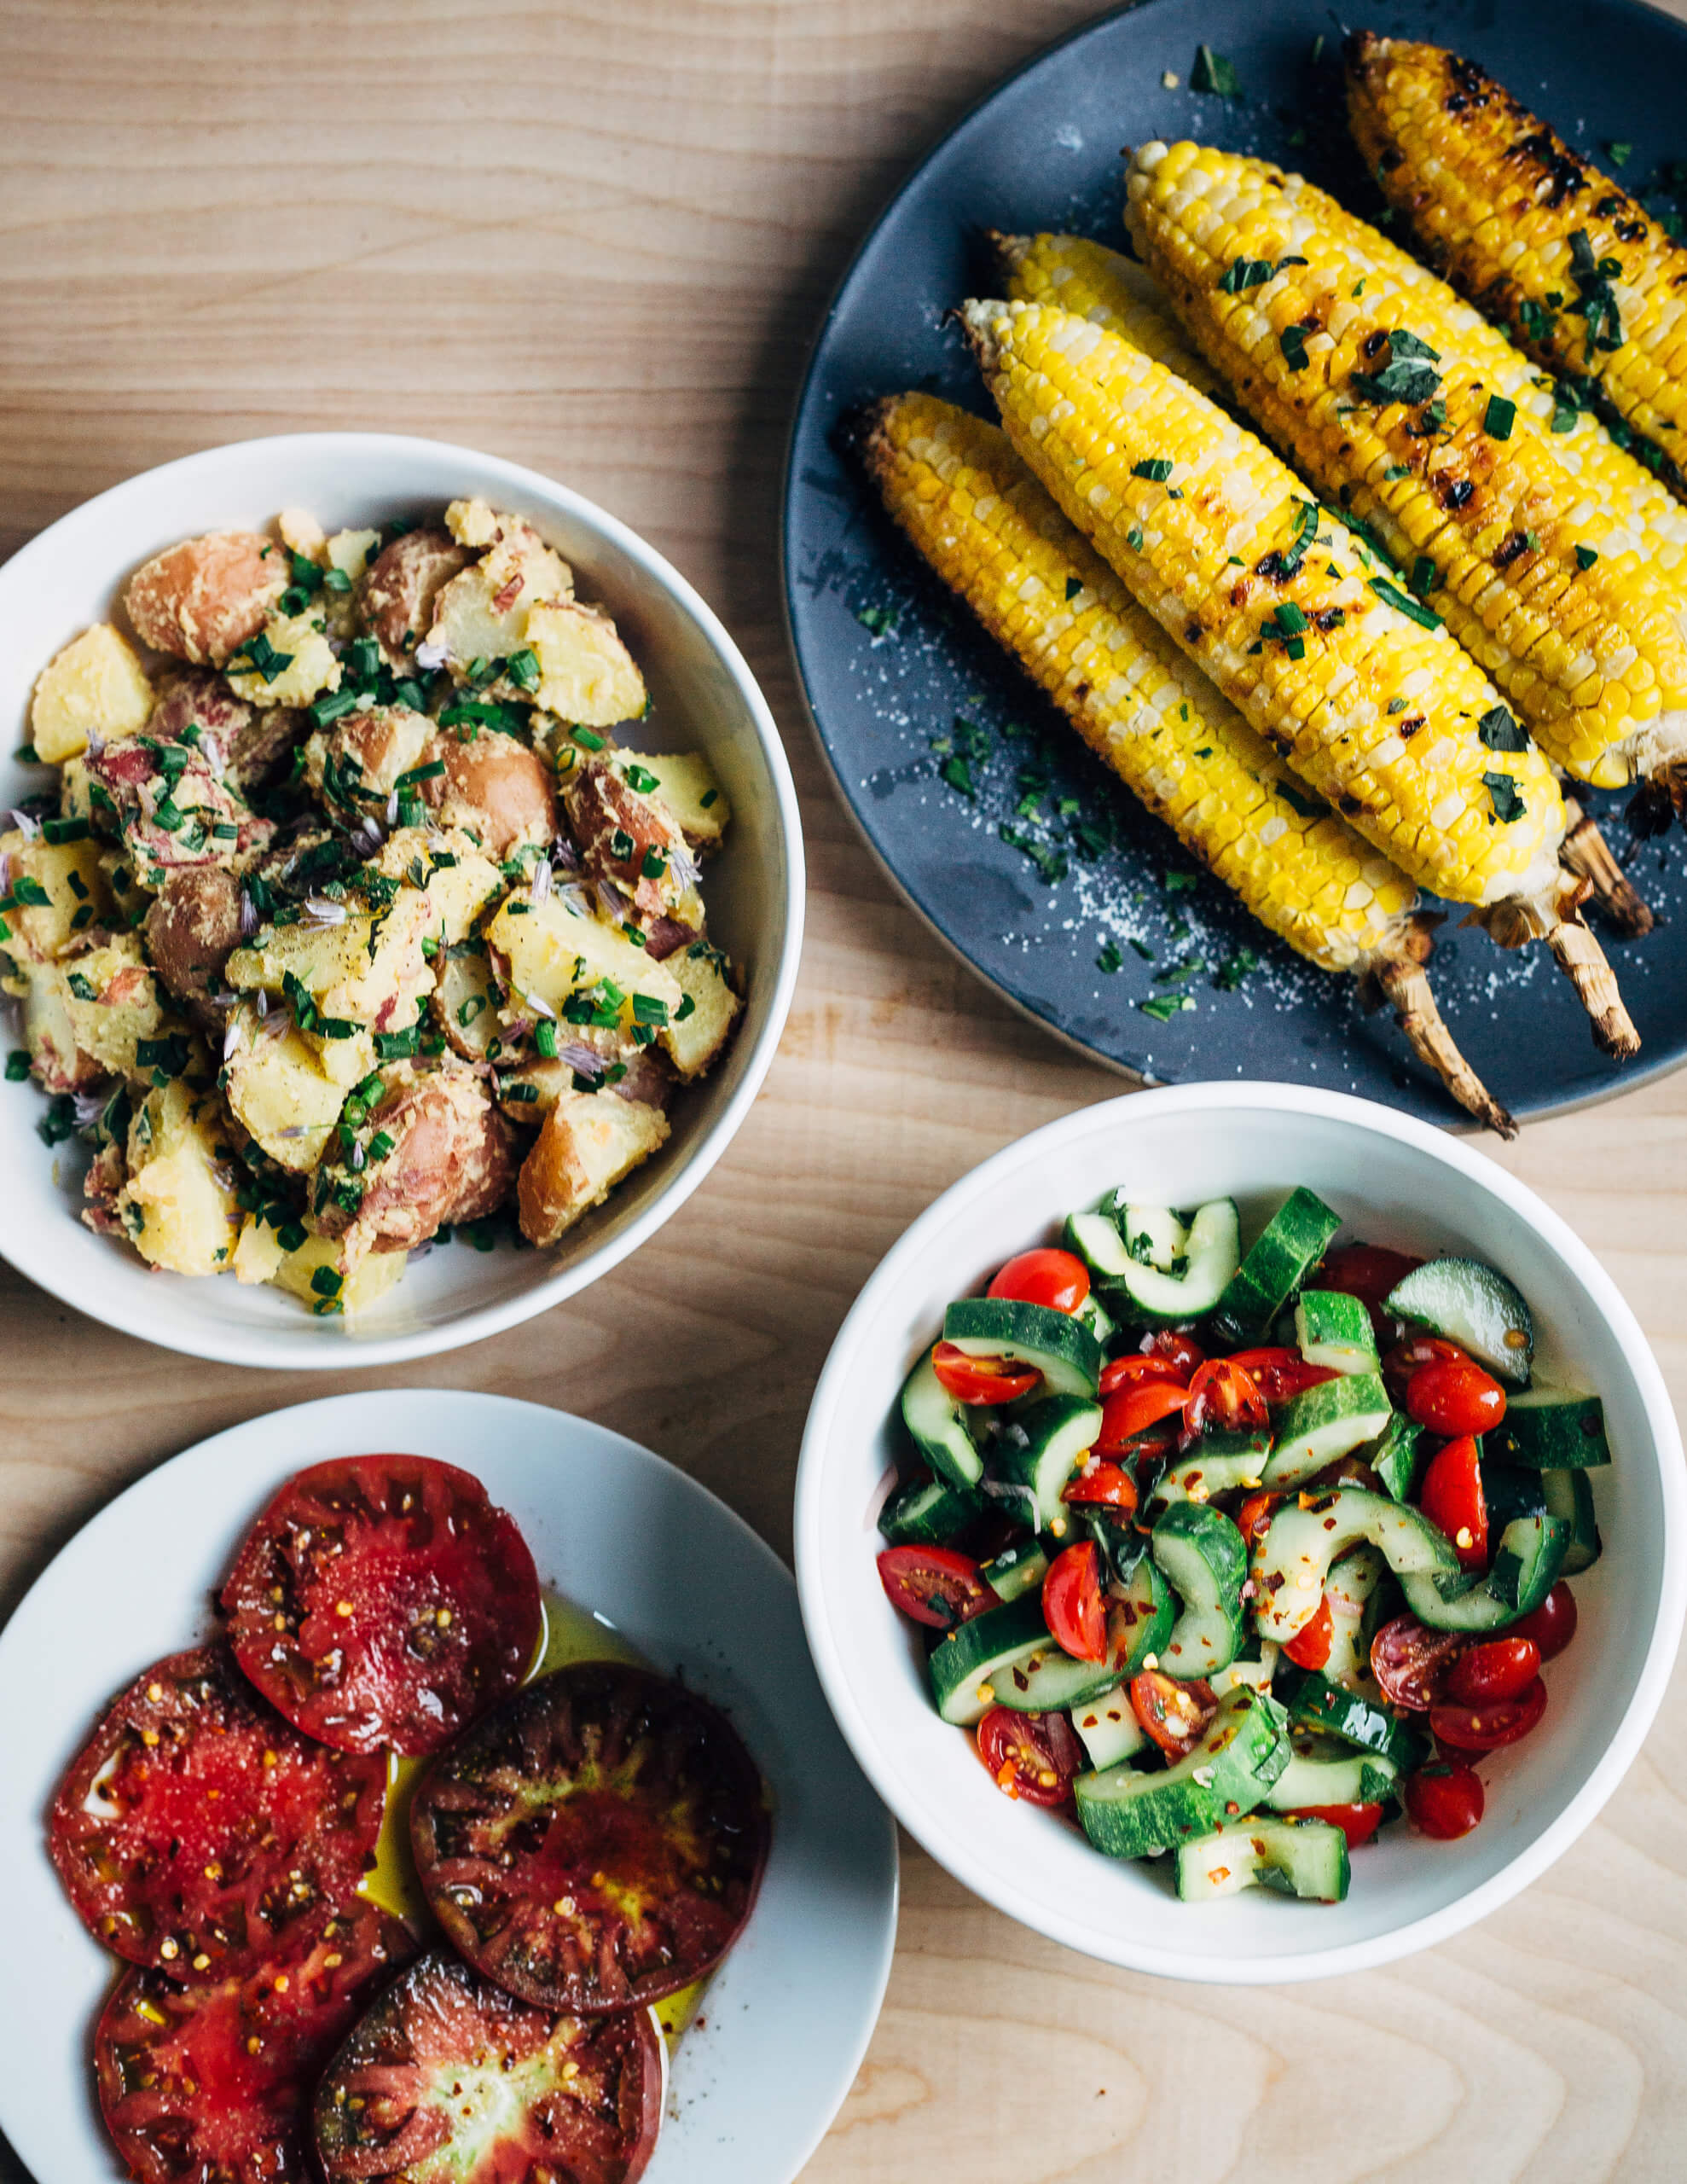 Simple sides for a cookout: grilled corn, cucumber and tomato salad, Dijon potato salad, and sliced tomatoes.